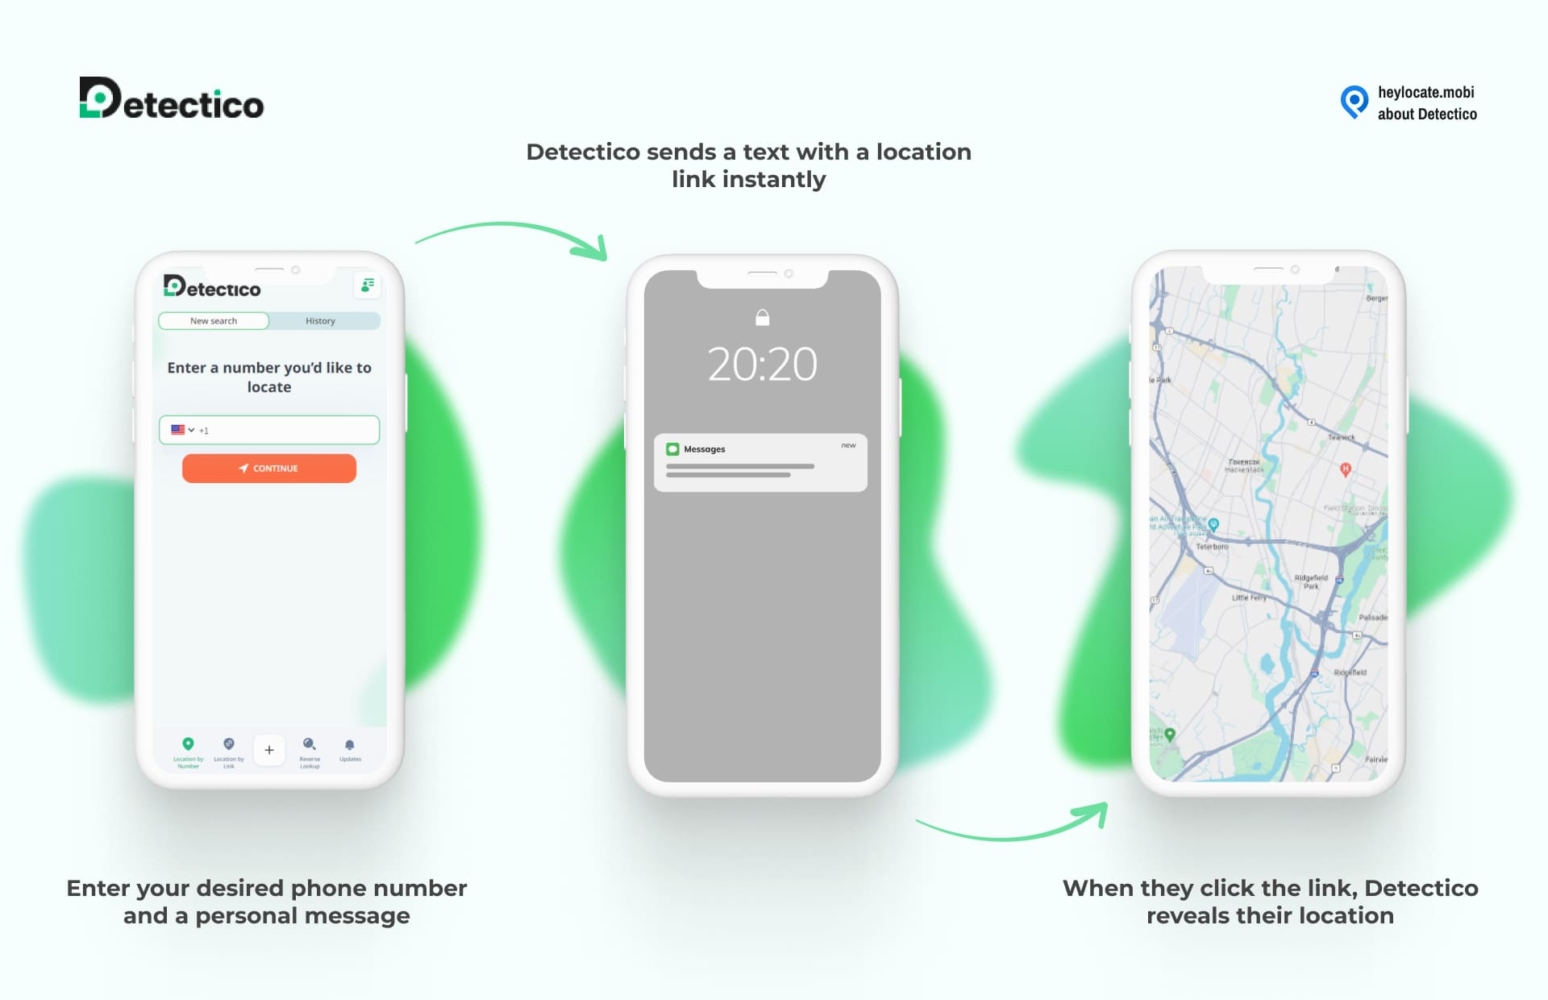 Promotional graphic for Detectico, a location tracking service. The first phone screen shows the Detectico app interface with a field to enter a phone number and a 'Continue' button. An arrow points to the second screen of the phone, indicating a notification of a message being sent to the recipient. Another arrow leads to the third phone screen displaying a map with a pinpointed location, stating, 'When they click the link, Detectico reveals their location.' The website 'heylocate.mobi' is mentioned in the top right corner with text 'about Detectico'